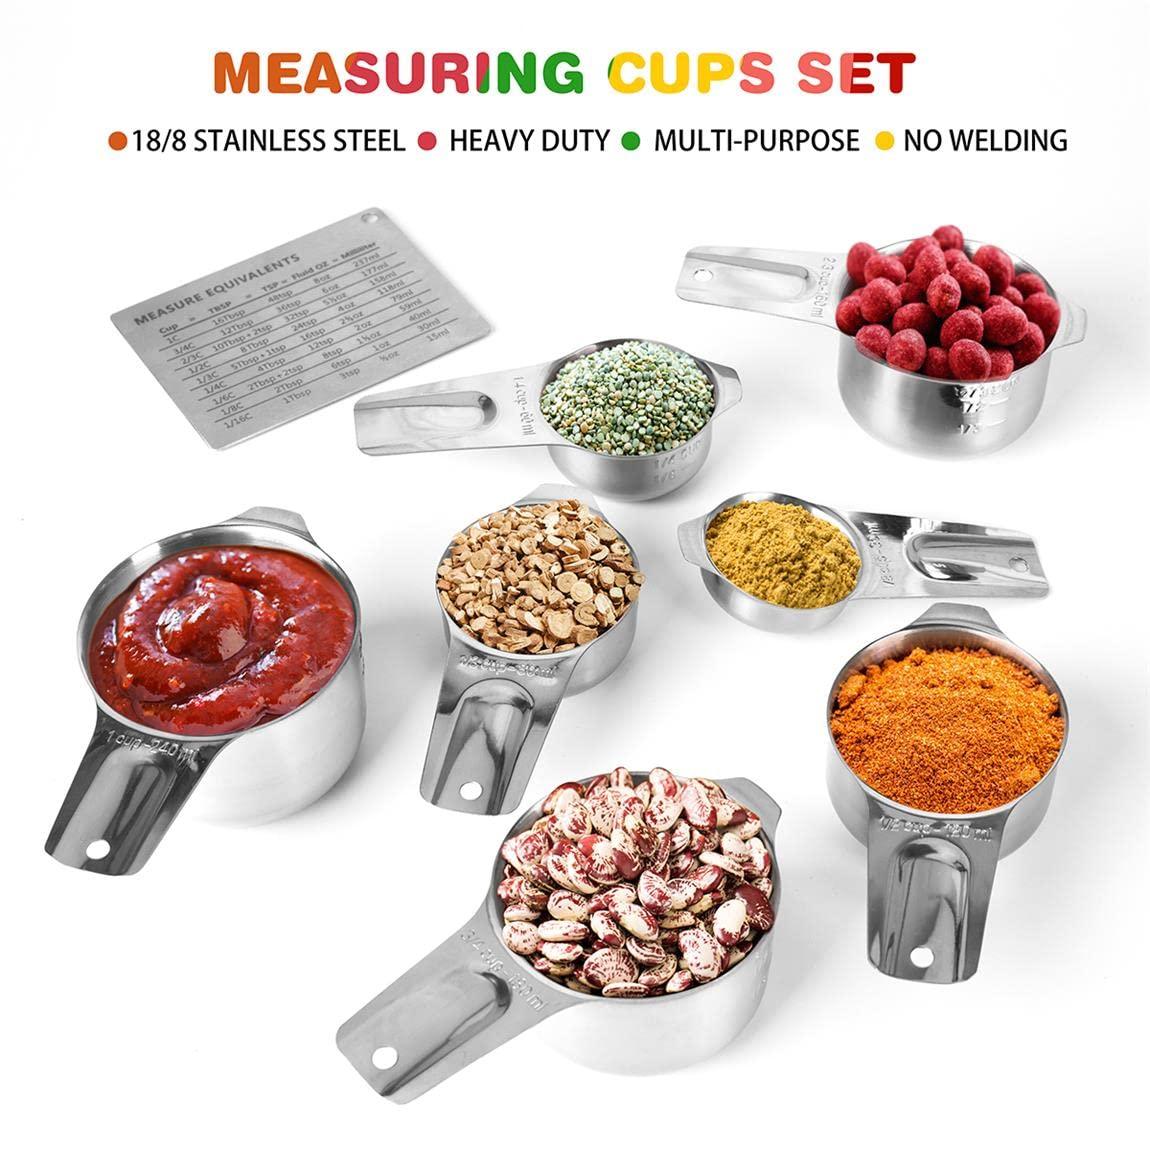 Measuring Cups Set and Magnetic Measuring Spoons Set,QtoiKce 18/8 Stainless Steel 7 Measure Cups and 7 Magnetic Measure Spoons,1 Leveler & 1 Conversion Chart for Dry and Liquid Ingredient - CookCave